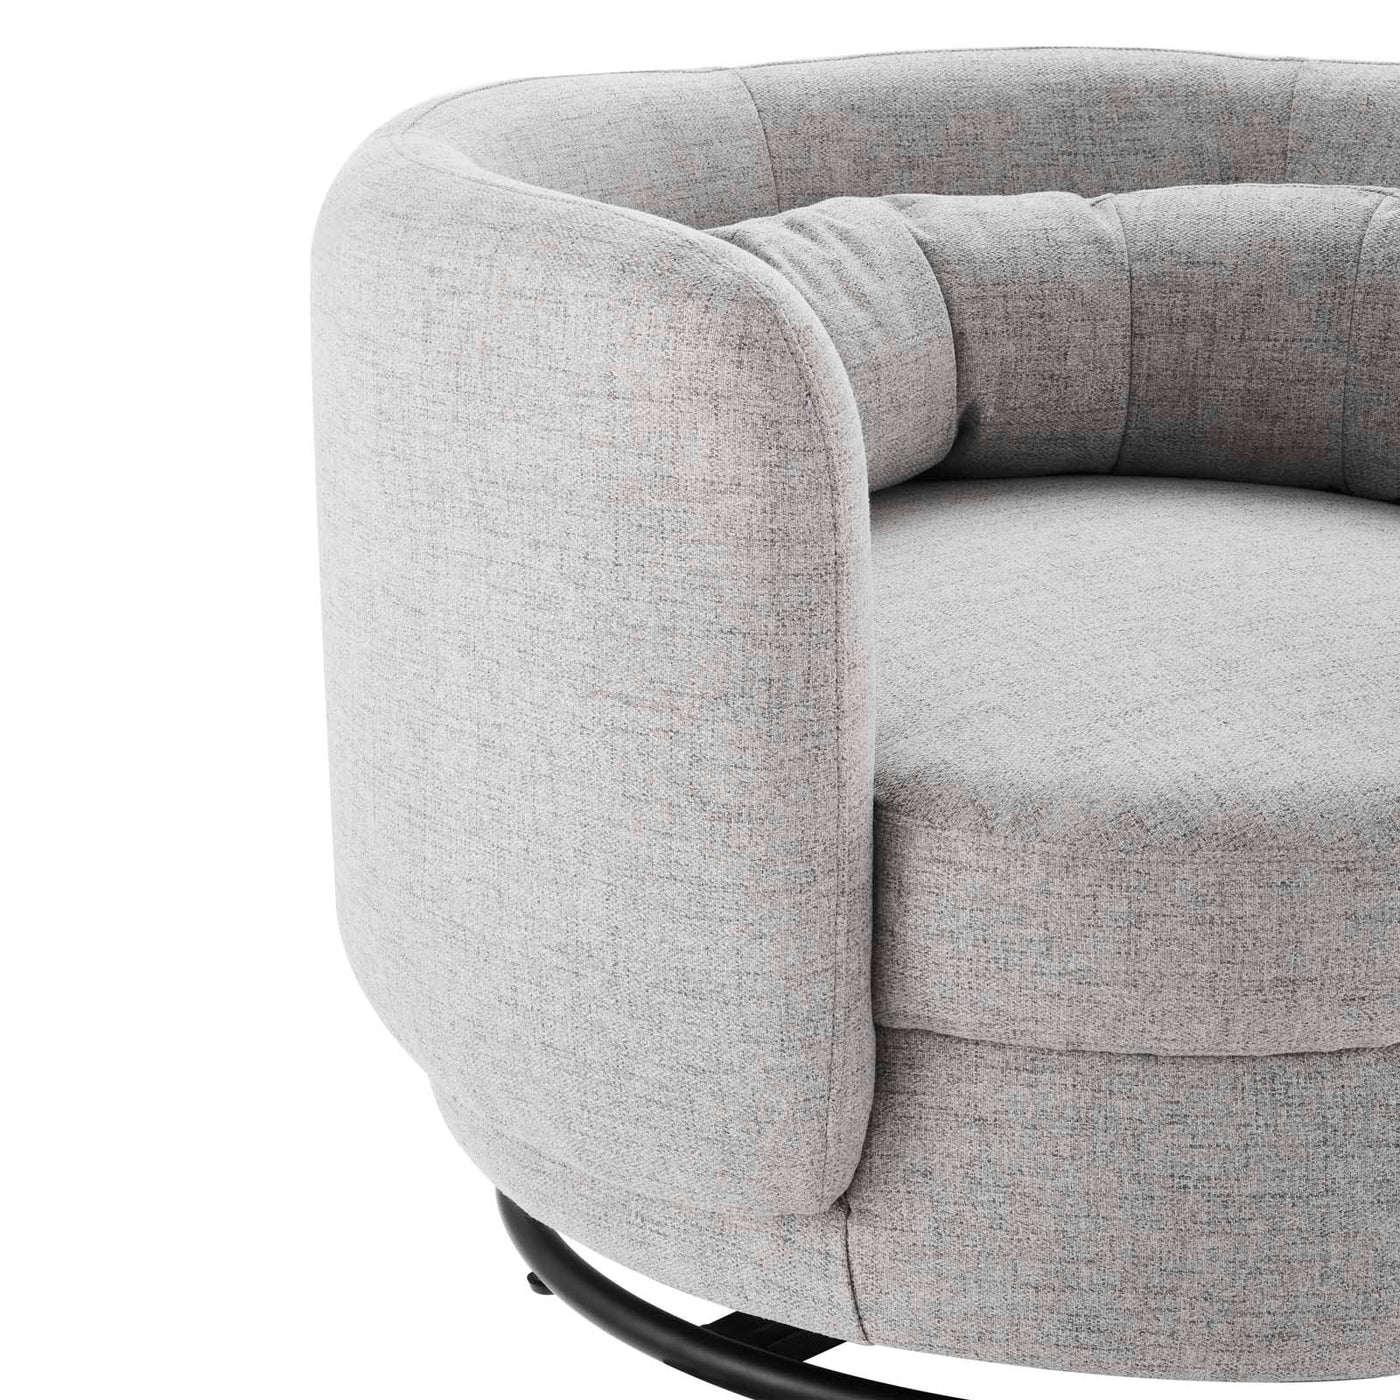 Relish Upholstered Fabric Swivel Chair